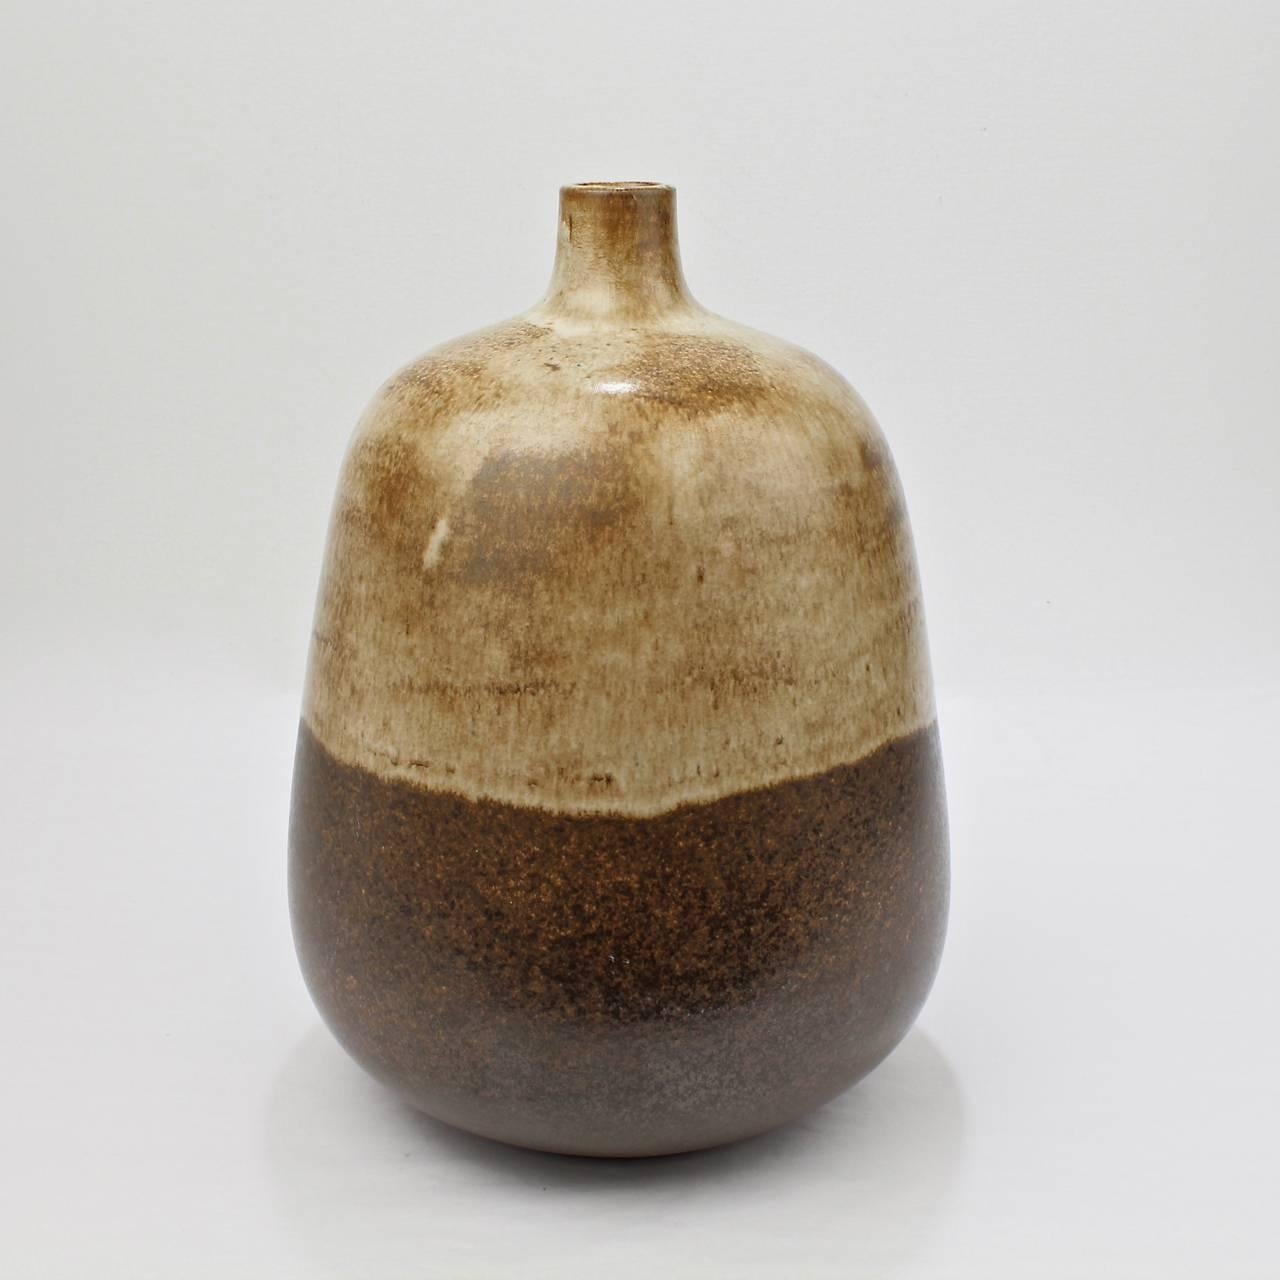 A cool, tear-drop form Mid-Century Italian pottery vase by Alvino Bagni for Raymor.

With a mottled brown tone-in-tone glaze. 

Bears it's original label to the base.

Height: ca. 10 3/4 in.

Items purchased from David Sterner antiques must